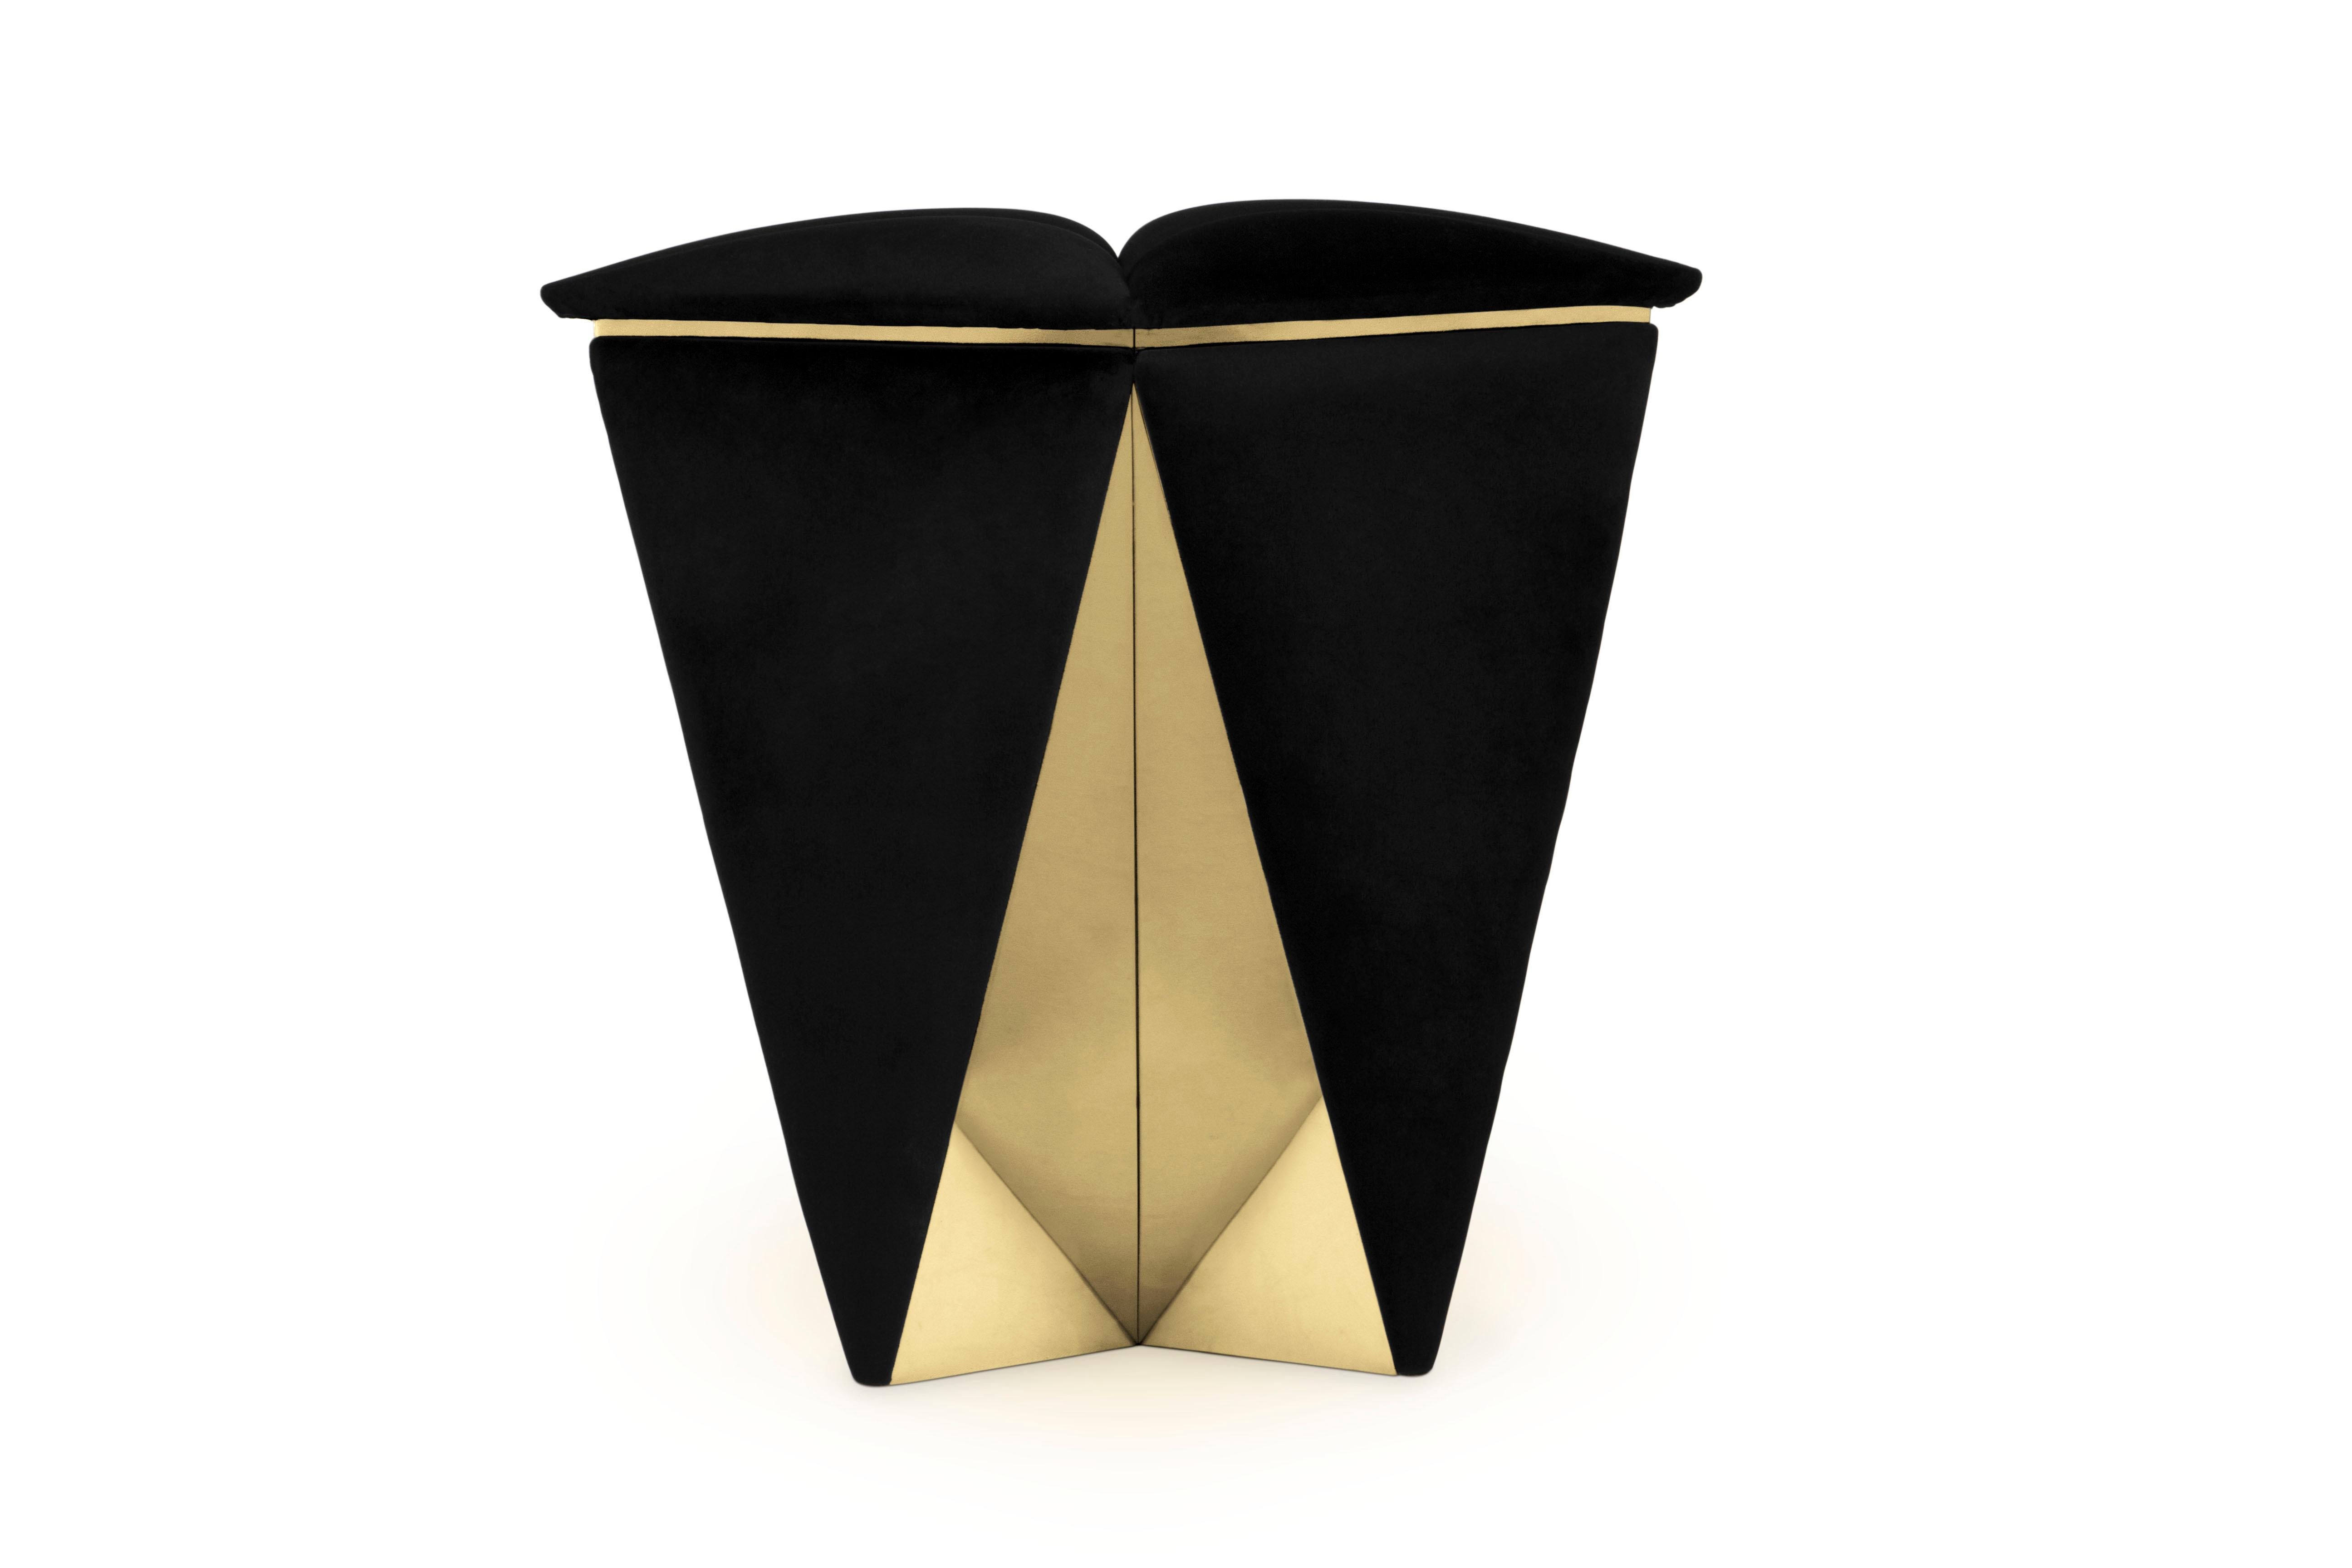 The Prisma stool is a symphony of meticulous proportions based on a simple square black velvet, created with the same empowering and passionate aesthetics in its design. The unified softness conceptions of well-defined geometric shapes end in a gold